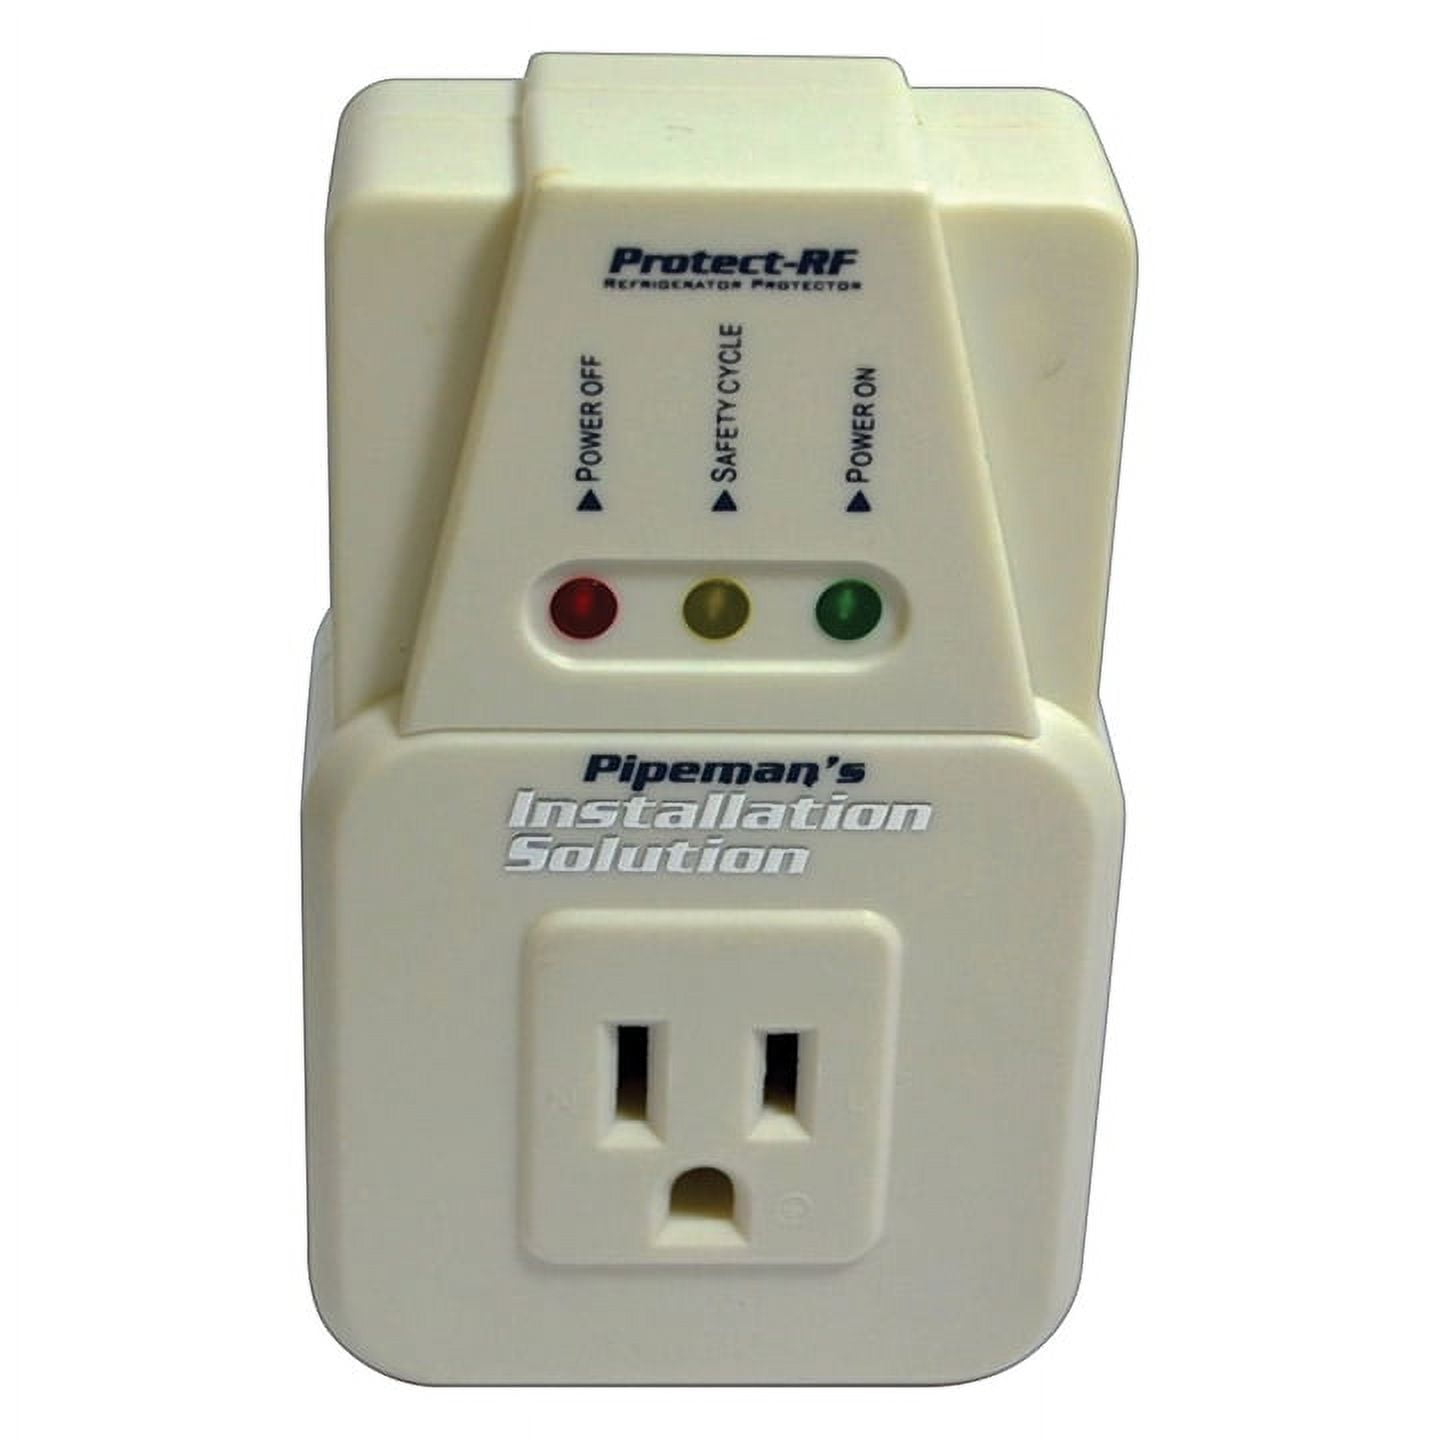 2-Pack 1800 Watts Refrigerator Voltage Surge Protector Appliance (New Model)